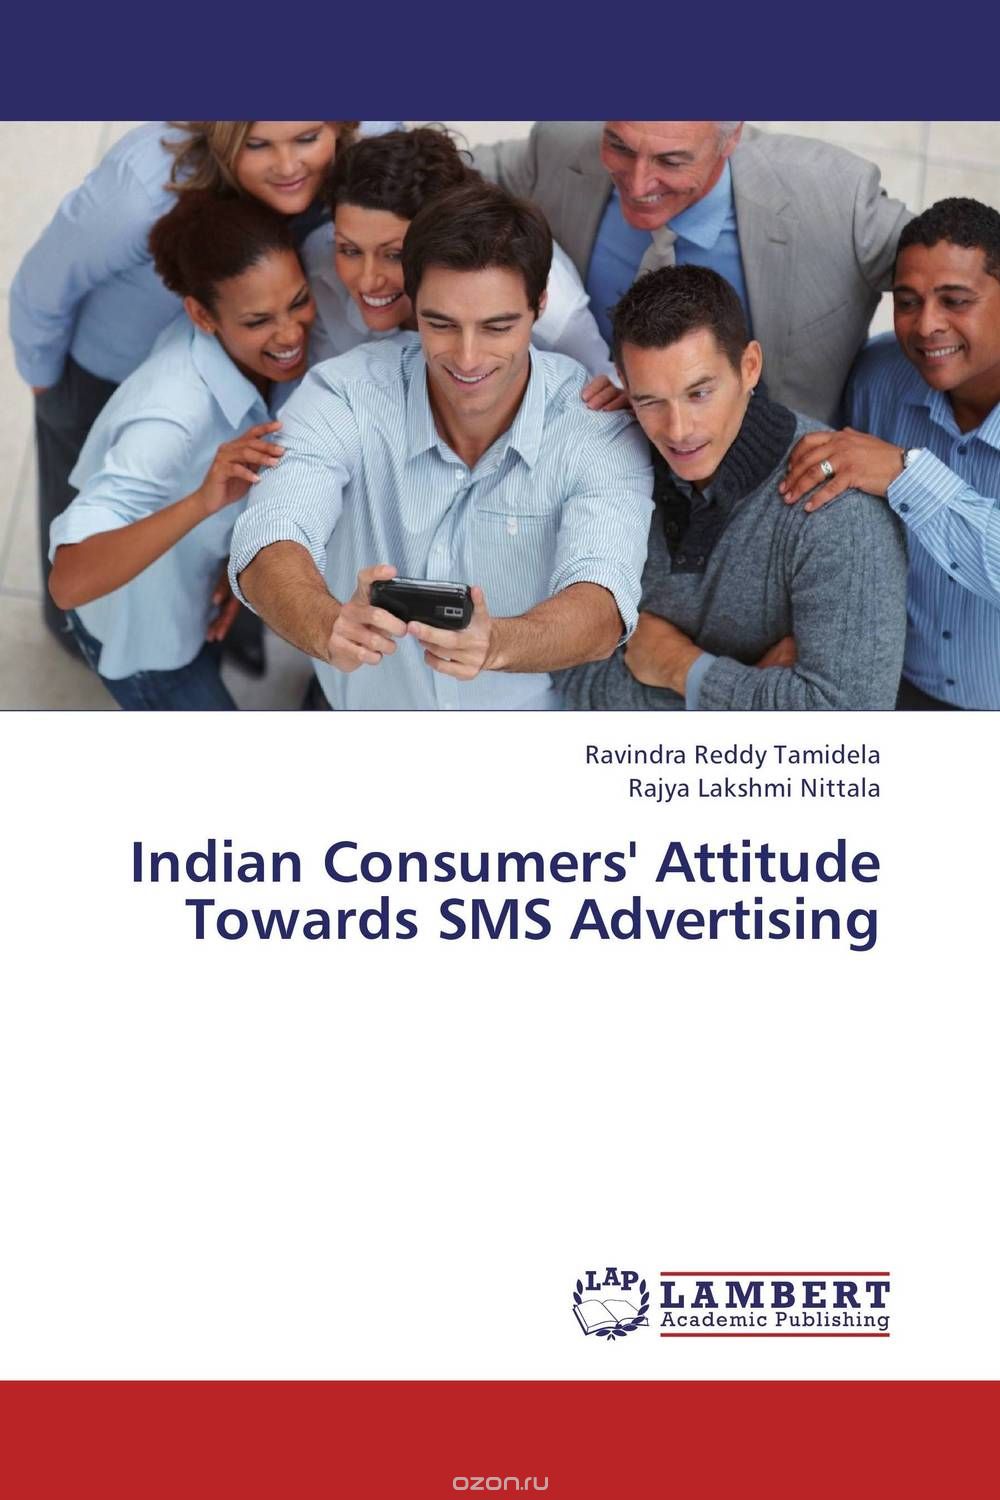 Indian Consumers' Attitude Towards SMS Advertising